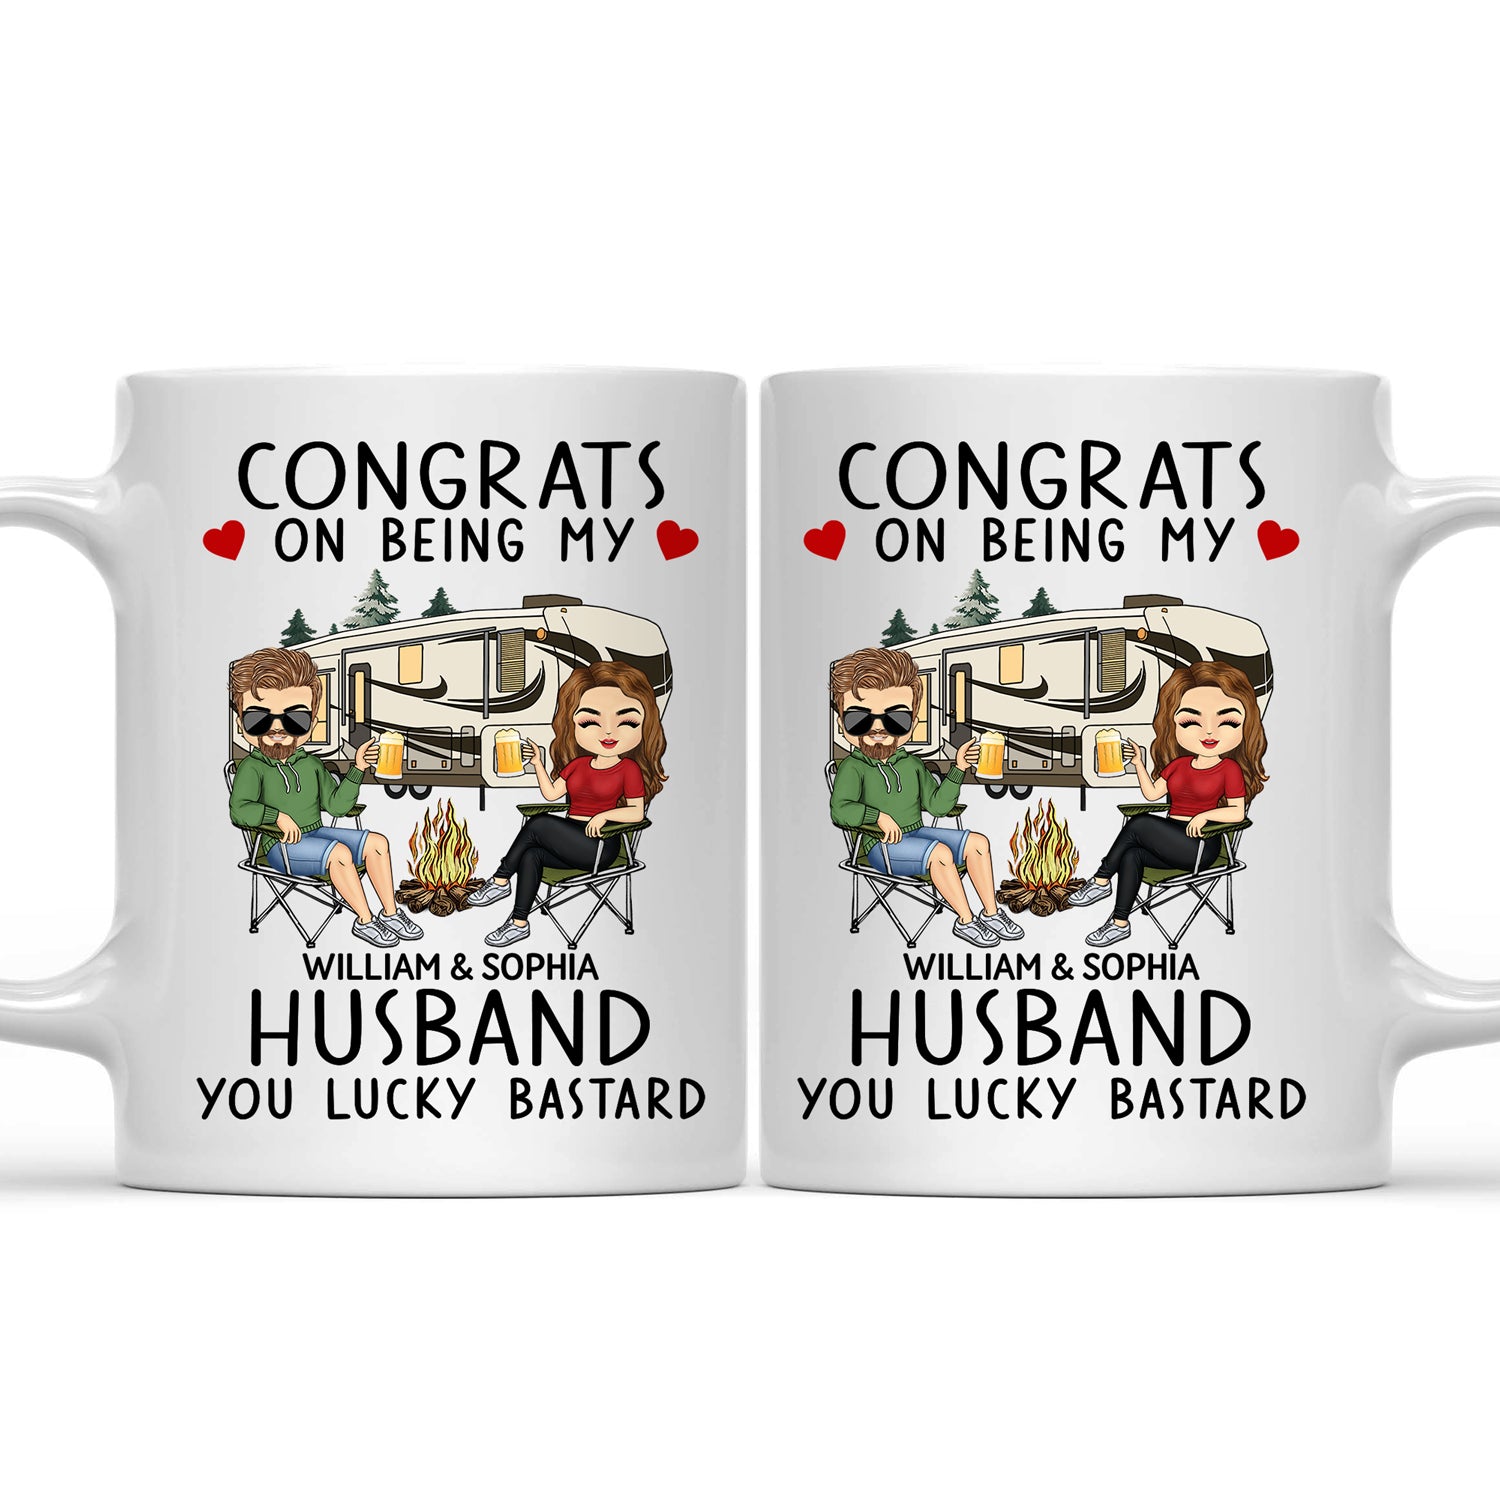 Congrats On Being My Husband Camping - Anniversary, Vacation, Funny Gift For Couples, Family - Personalized Mug